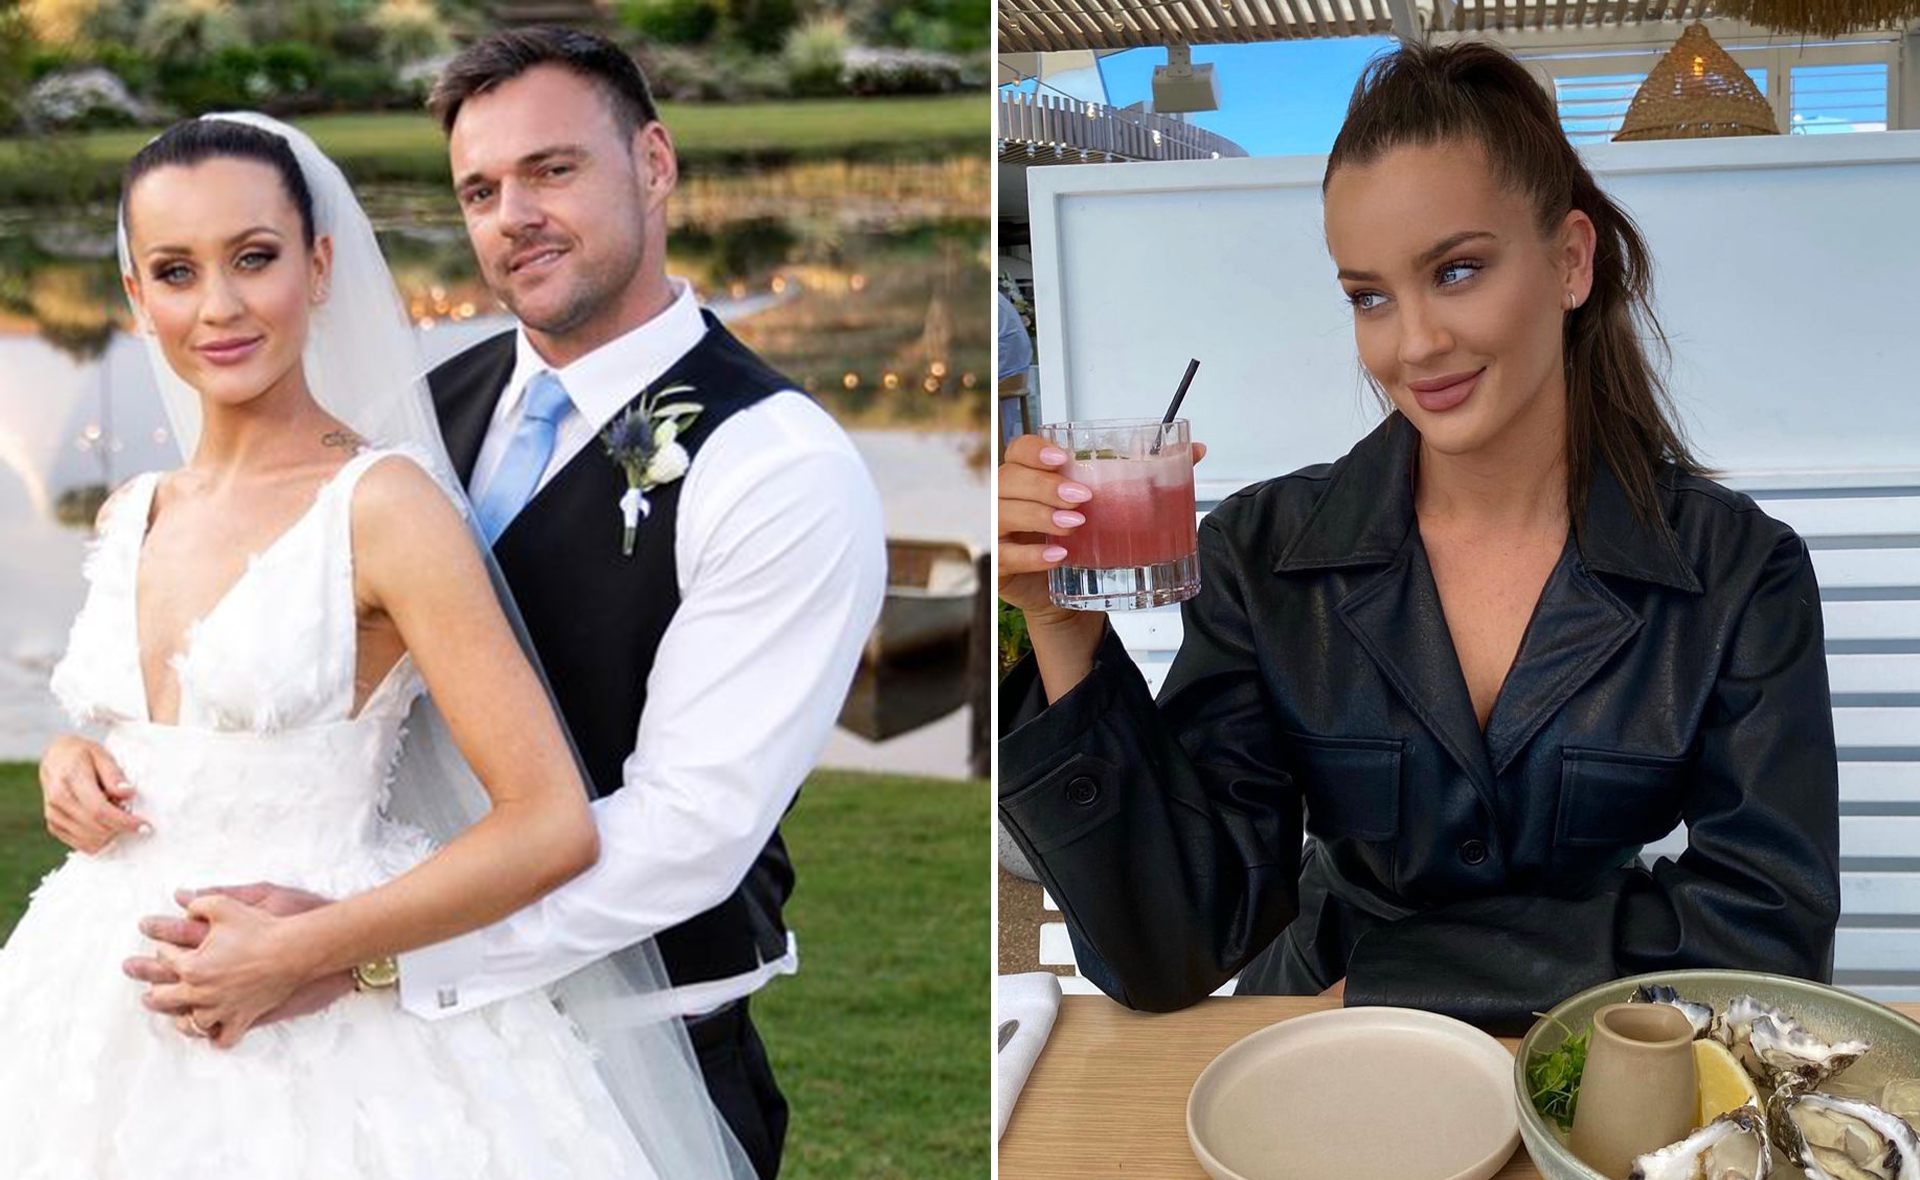 Ines Basic reveals Married At First Sight helped her overcome past traumas: “I had a very violent and troubled upbringing”